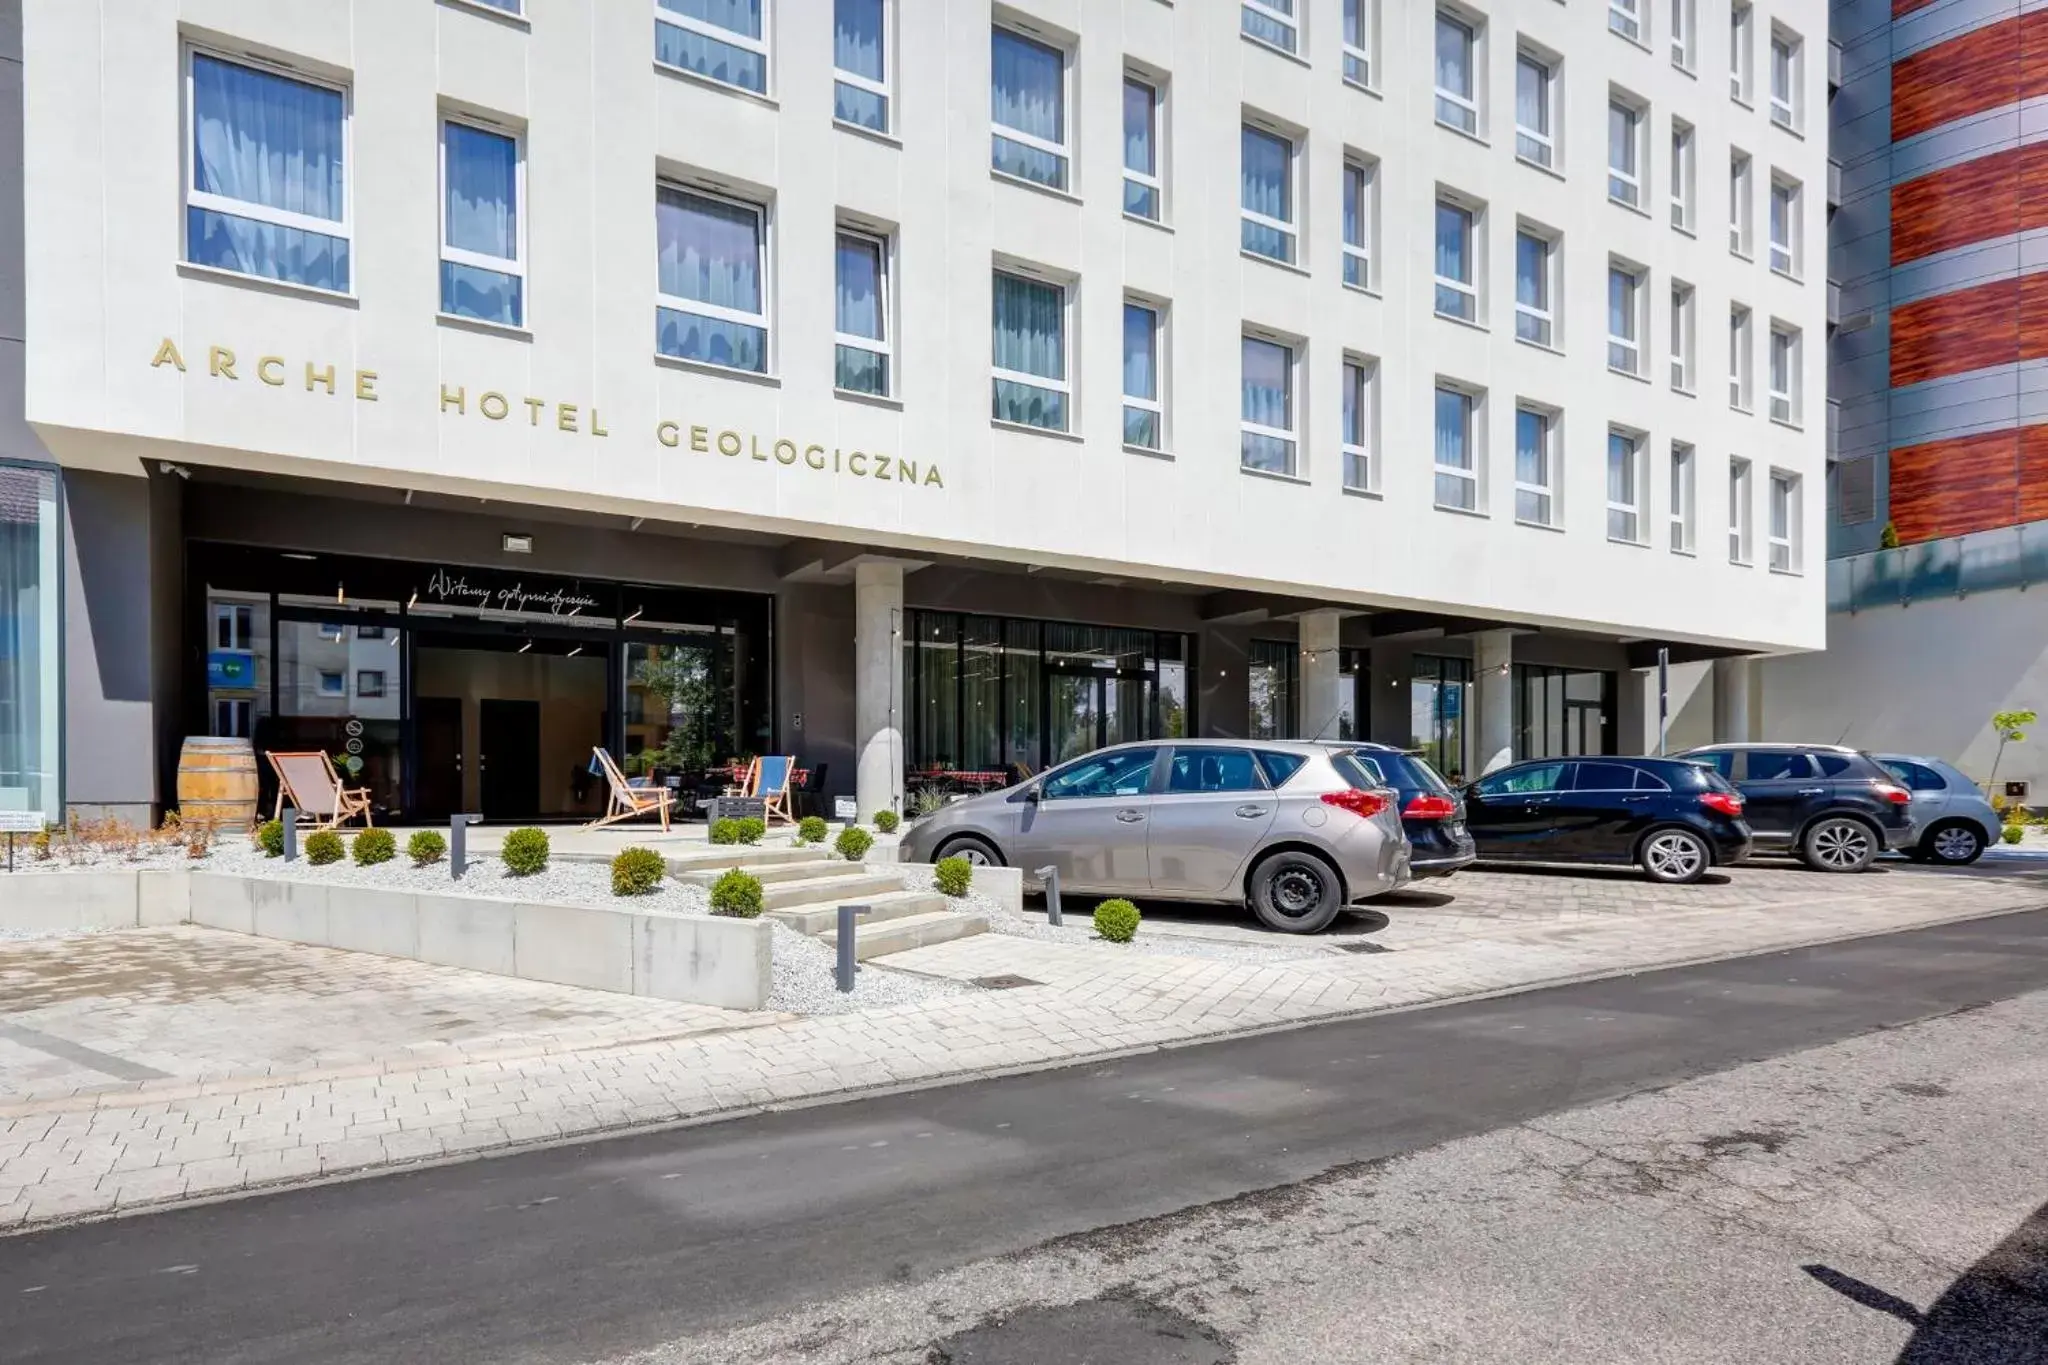 Property Building in Hotel Arche Geologiczna